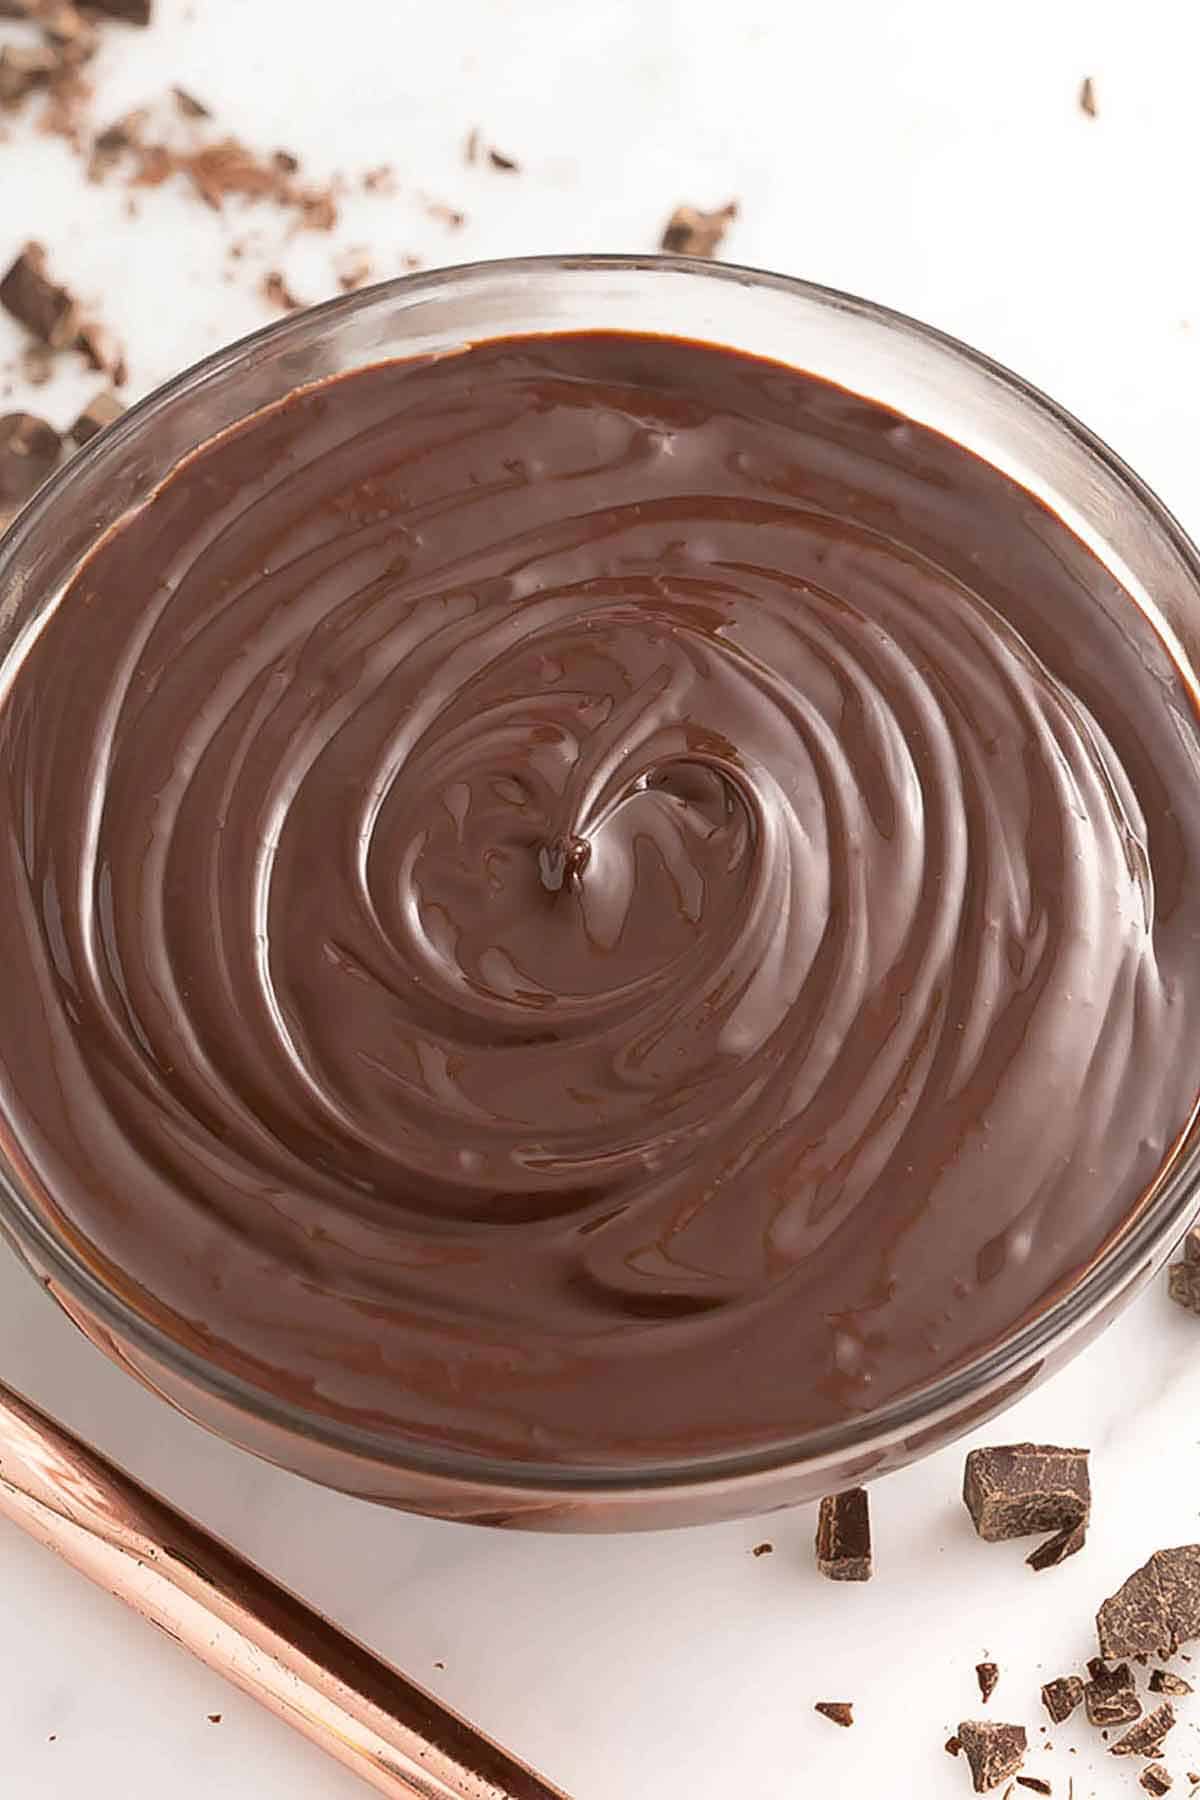 Overhead view of a bowl of chocolate ganache with chopped chocolate off to the side.